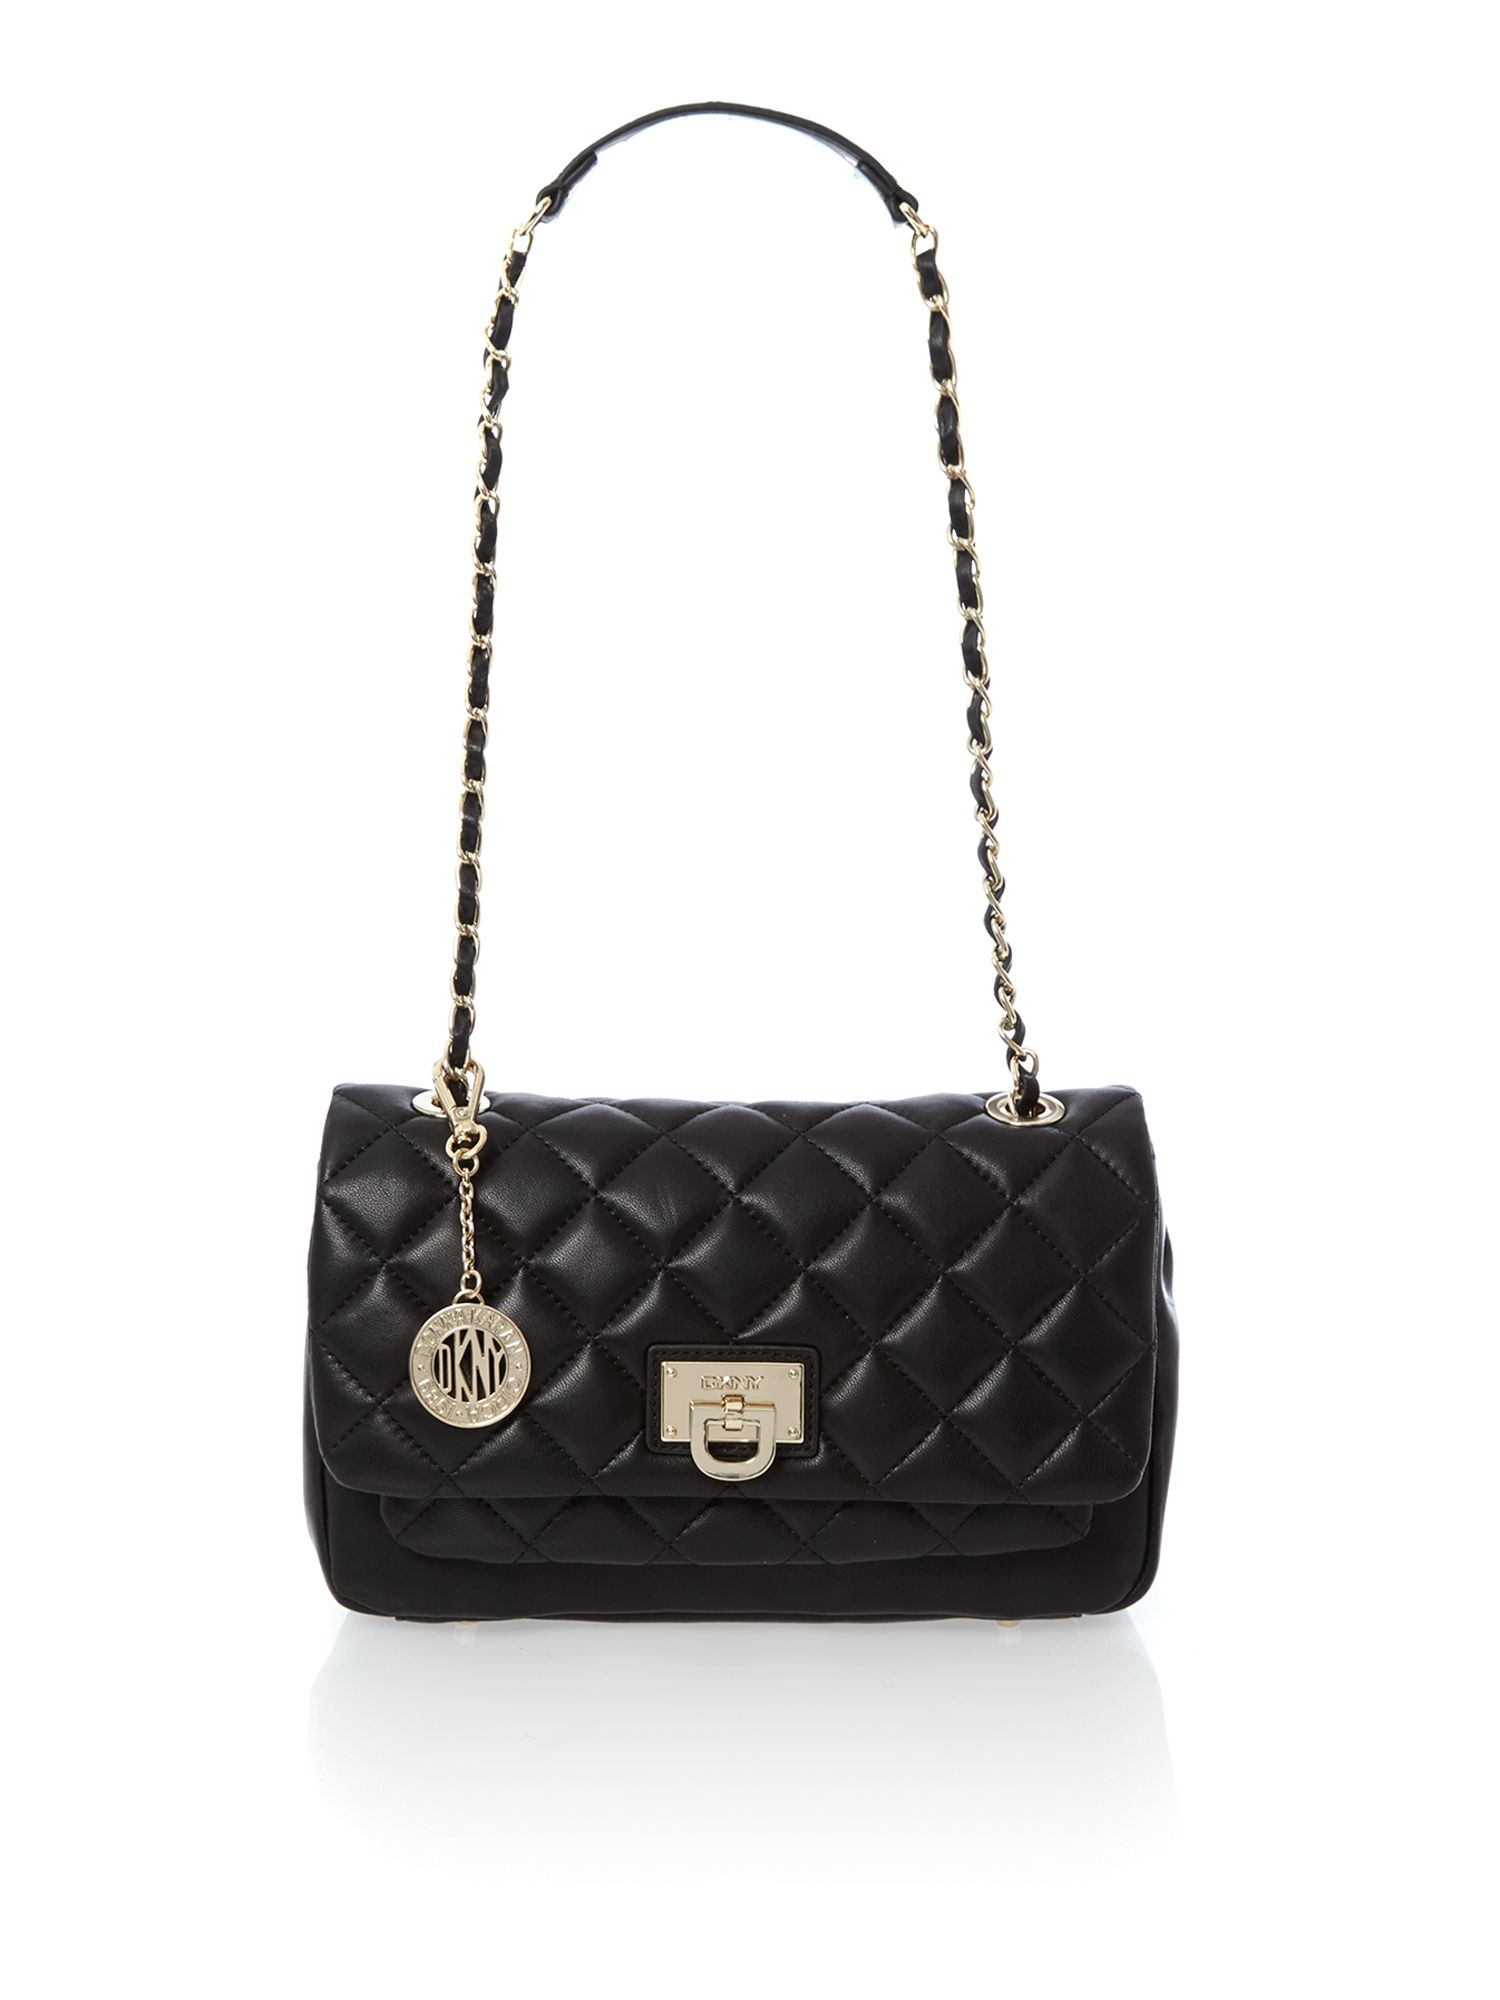 Dkny Black Medium Quilted Flap Over Cross Body Bag in Black | Lyst